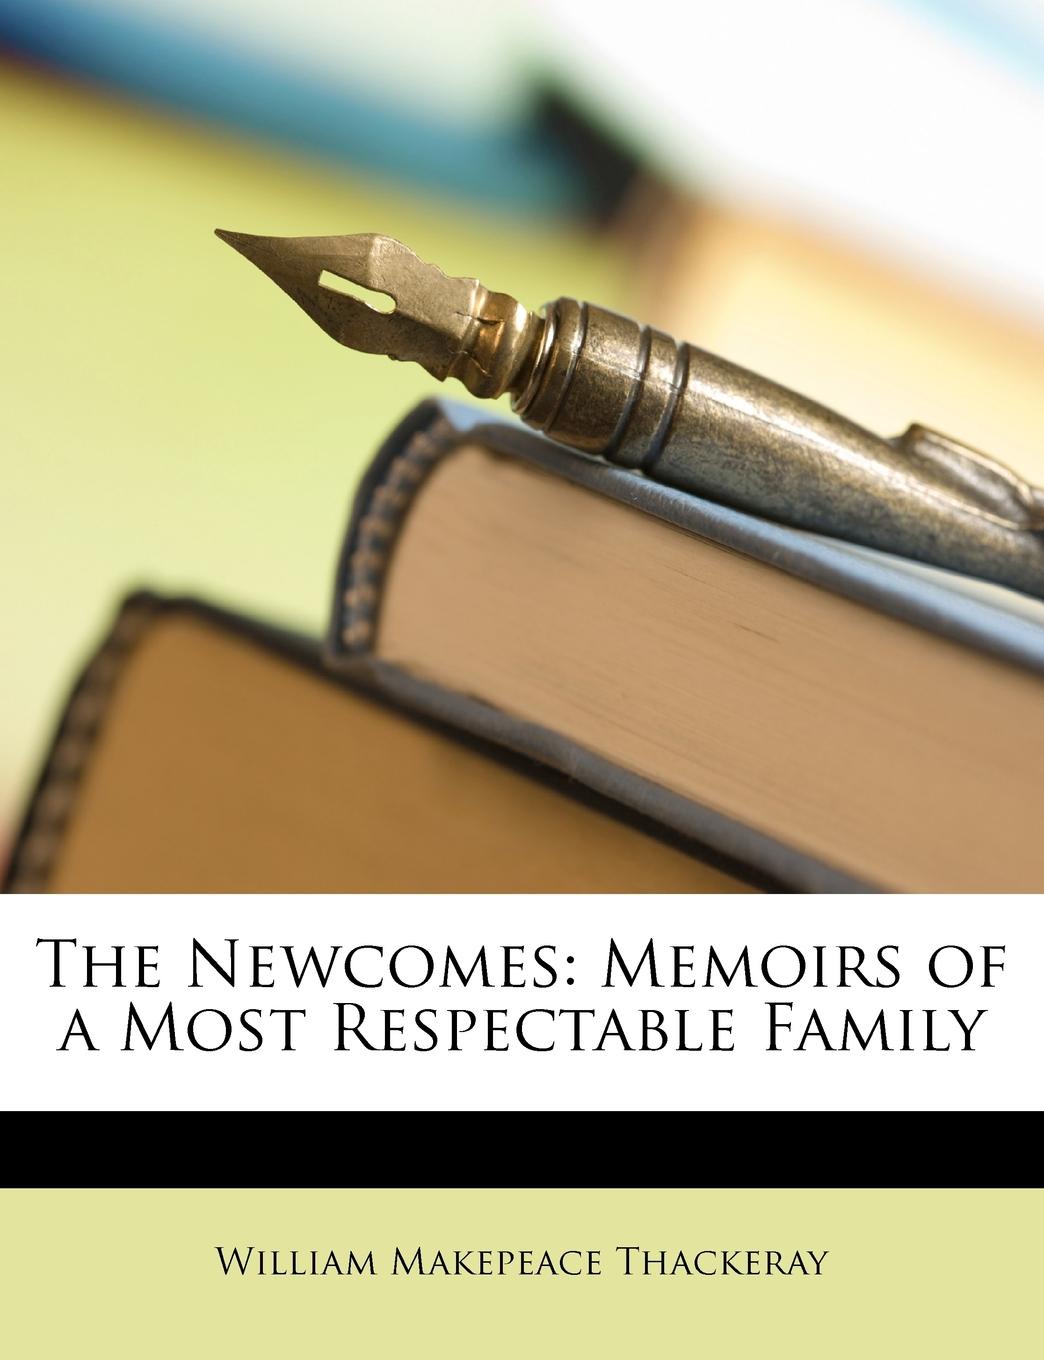 The Newcomes. Memoirs of a Most Respectable Family